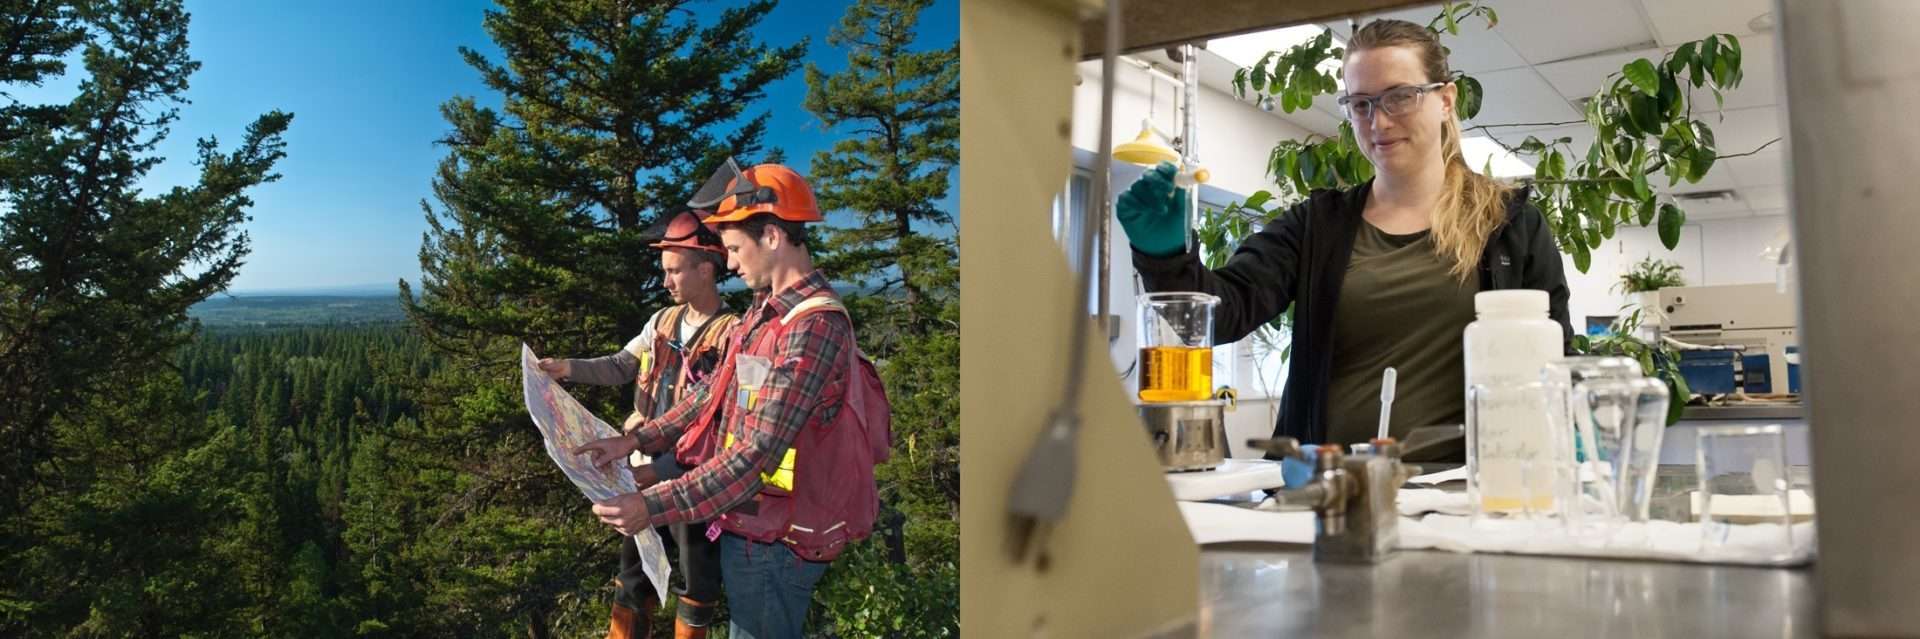 BC forest industry jobs for the future